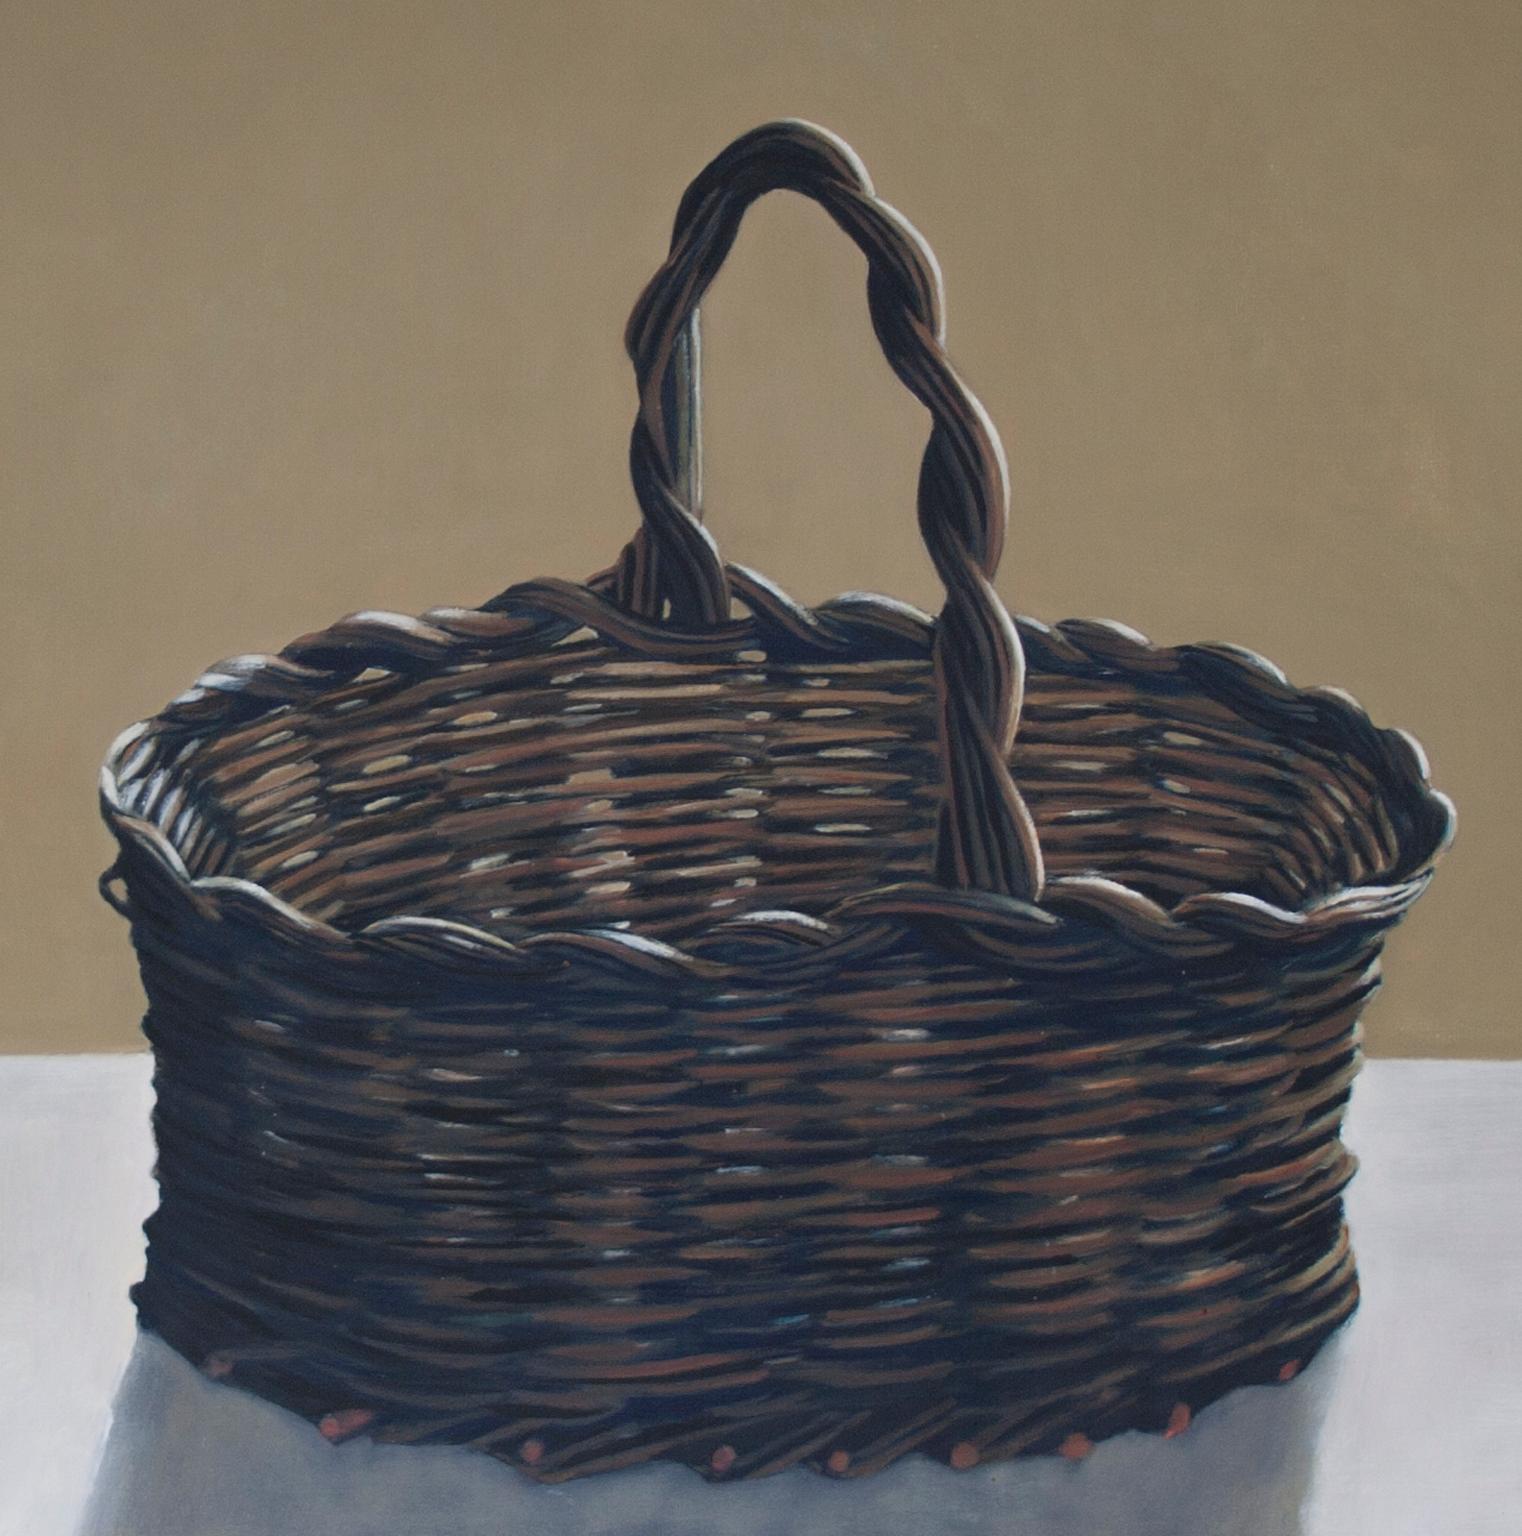 The Basket - contemporary still life oil painting by Patrice Lombardi im Angebot 2